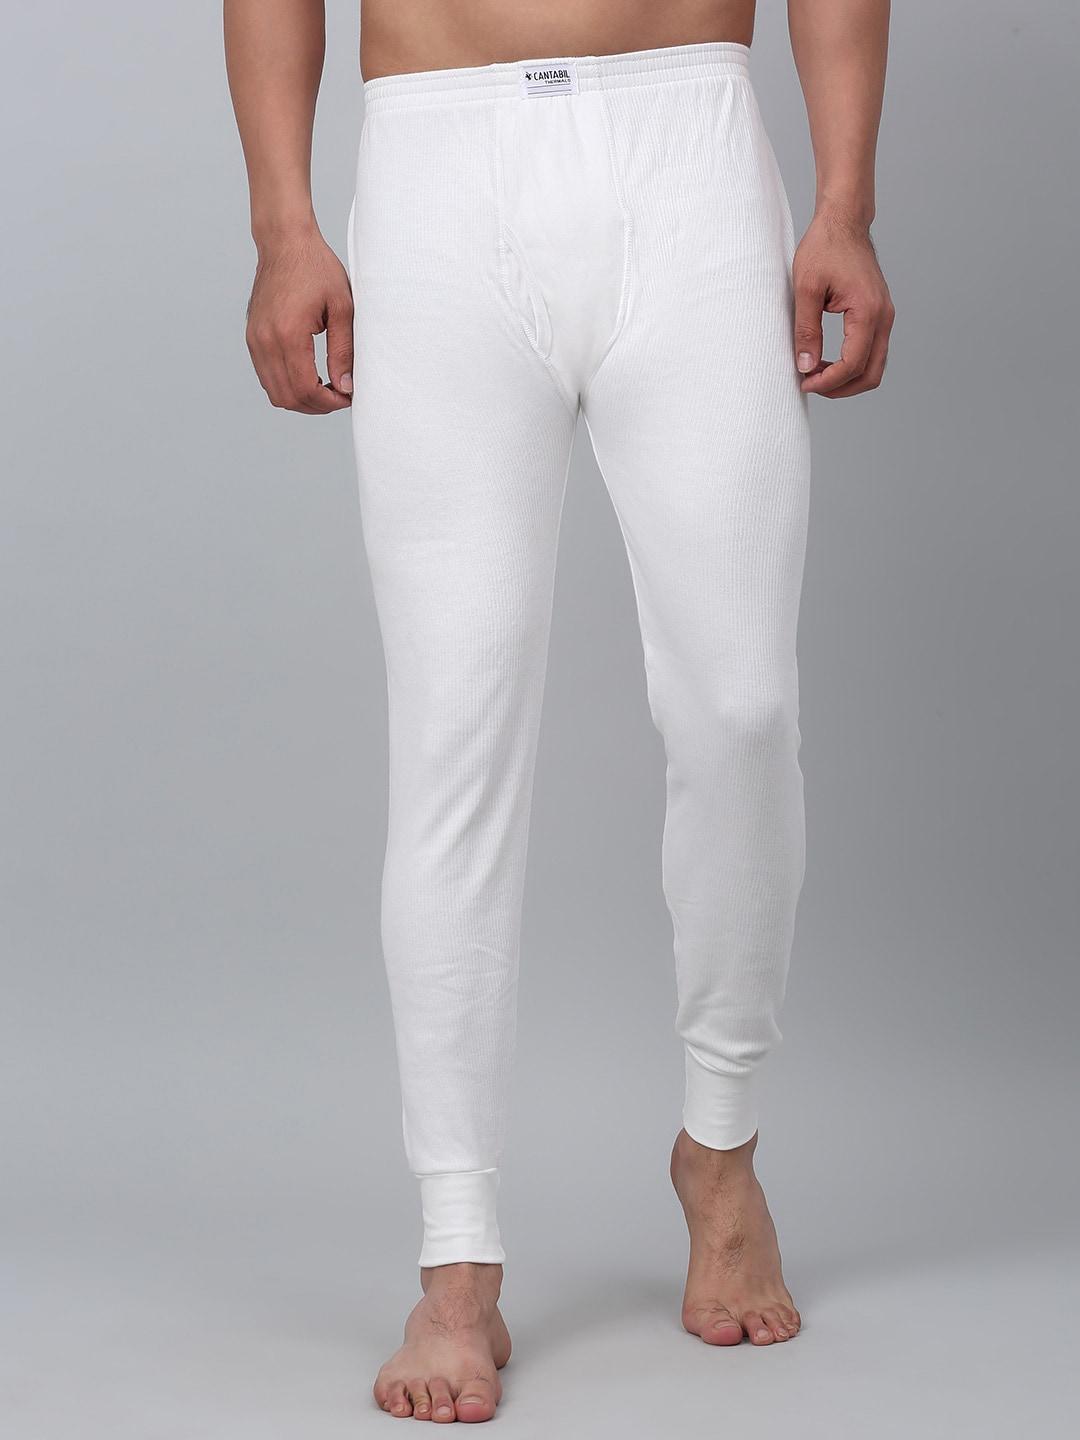 cantabil-men-mid-rise-cotton-thermal-bottom